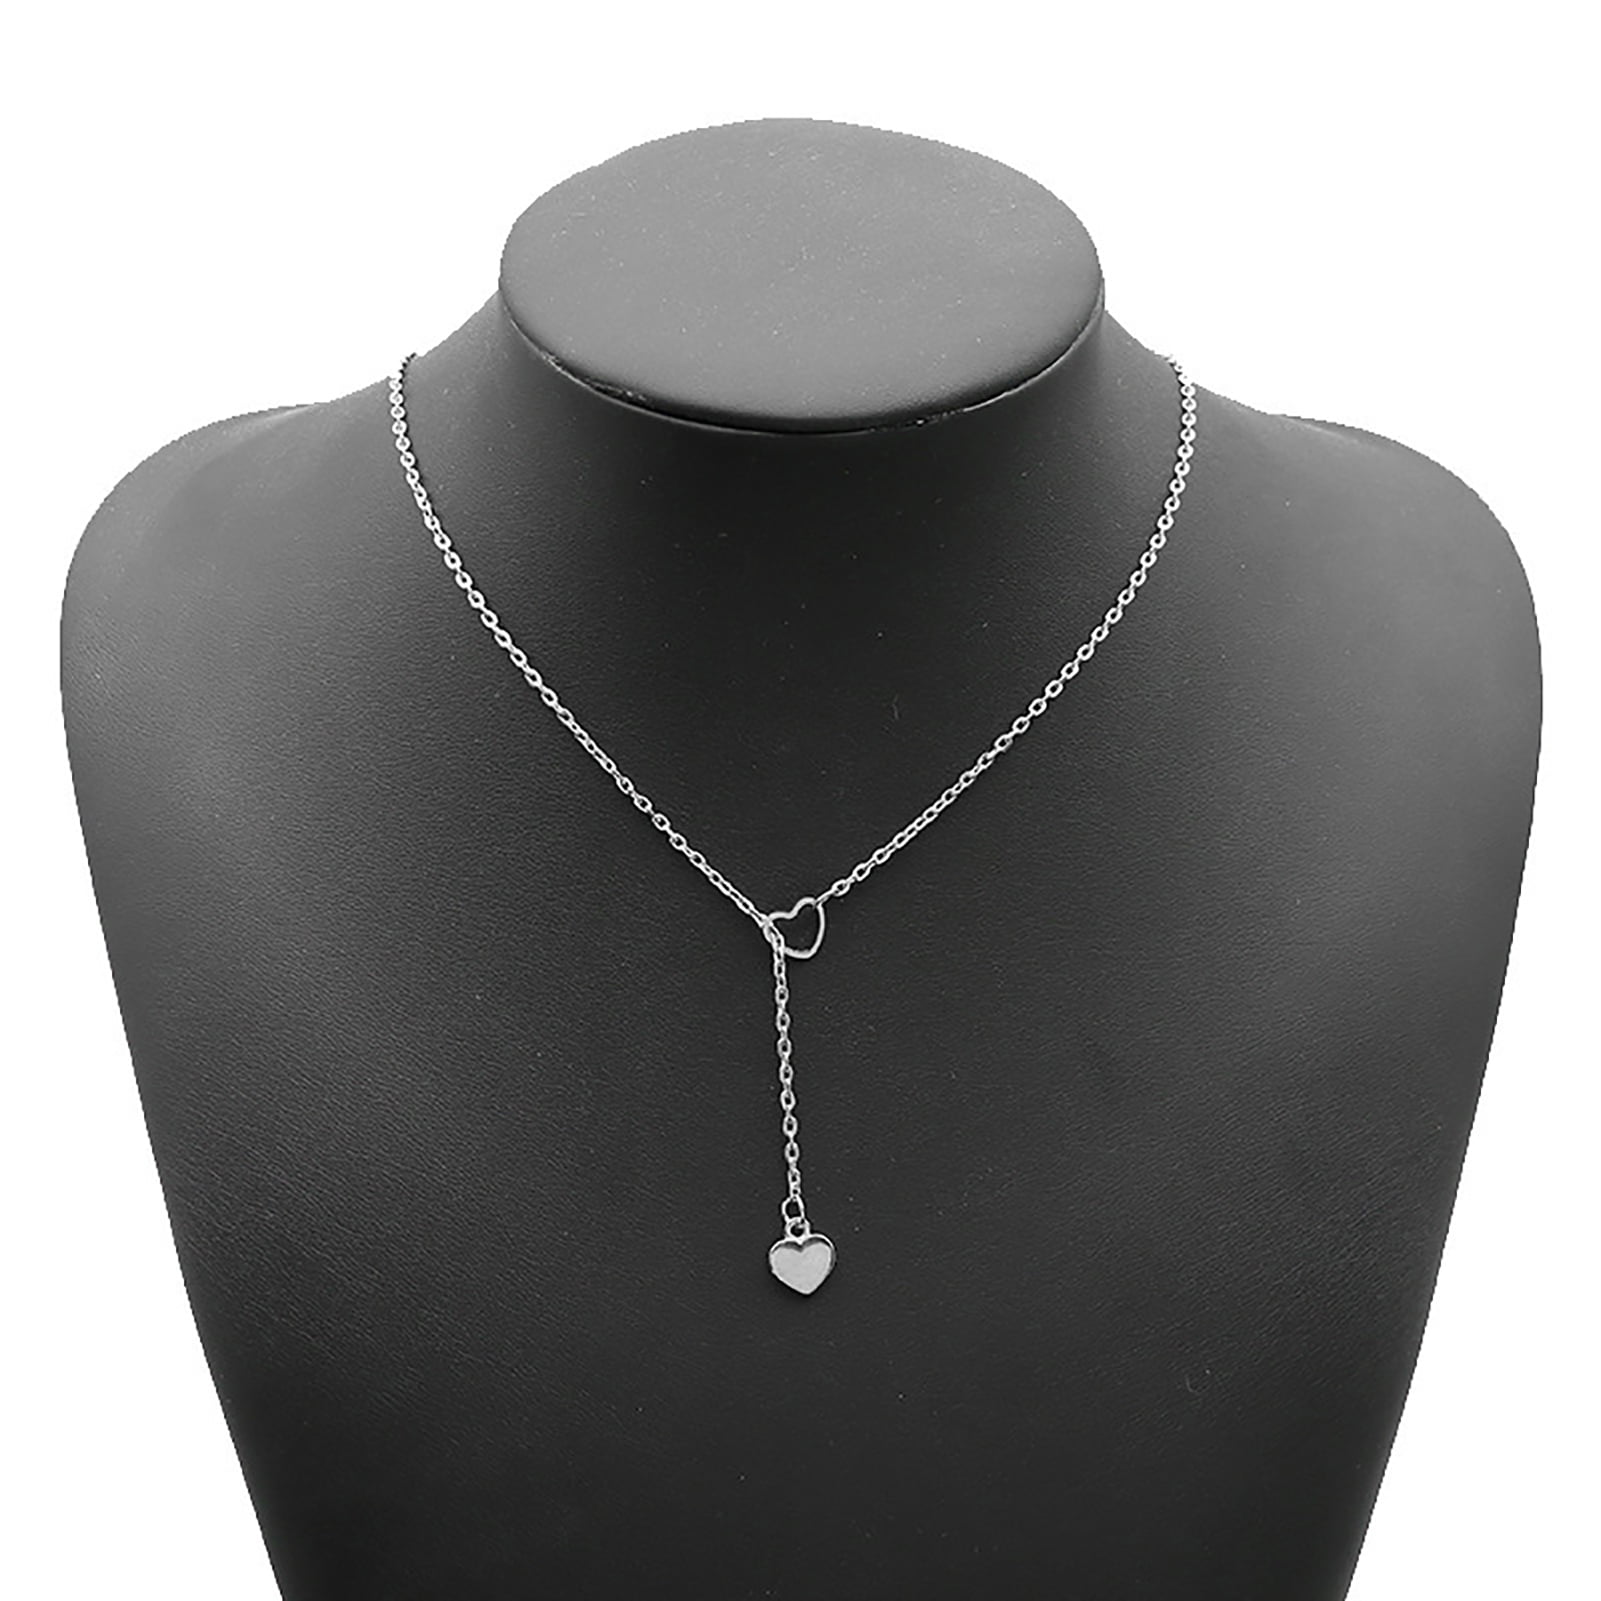 Grandest Birch Heart Simple Hollow Thin Chain Clavicle Necklace Jewelry  Accessory for Valentine Day Alloy Silver